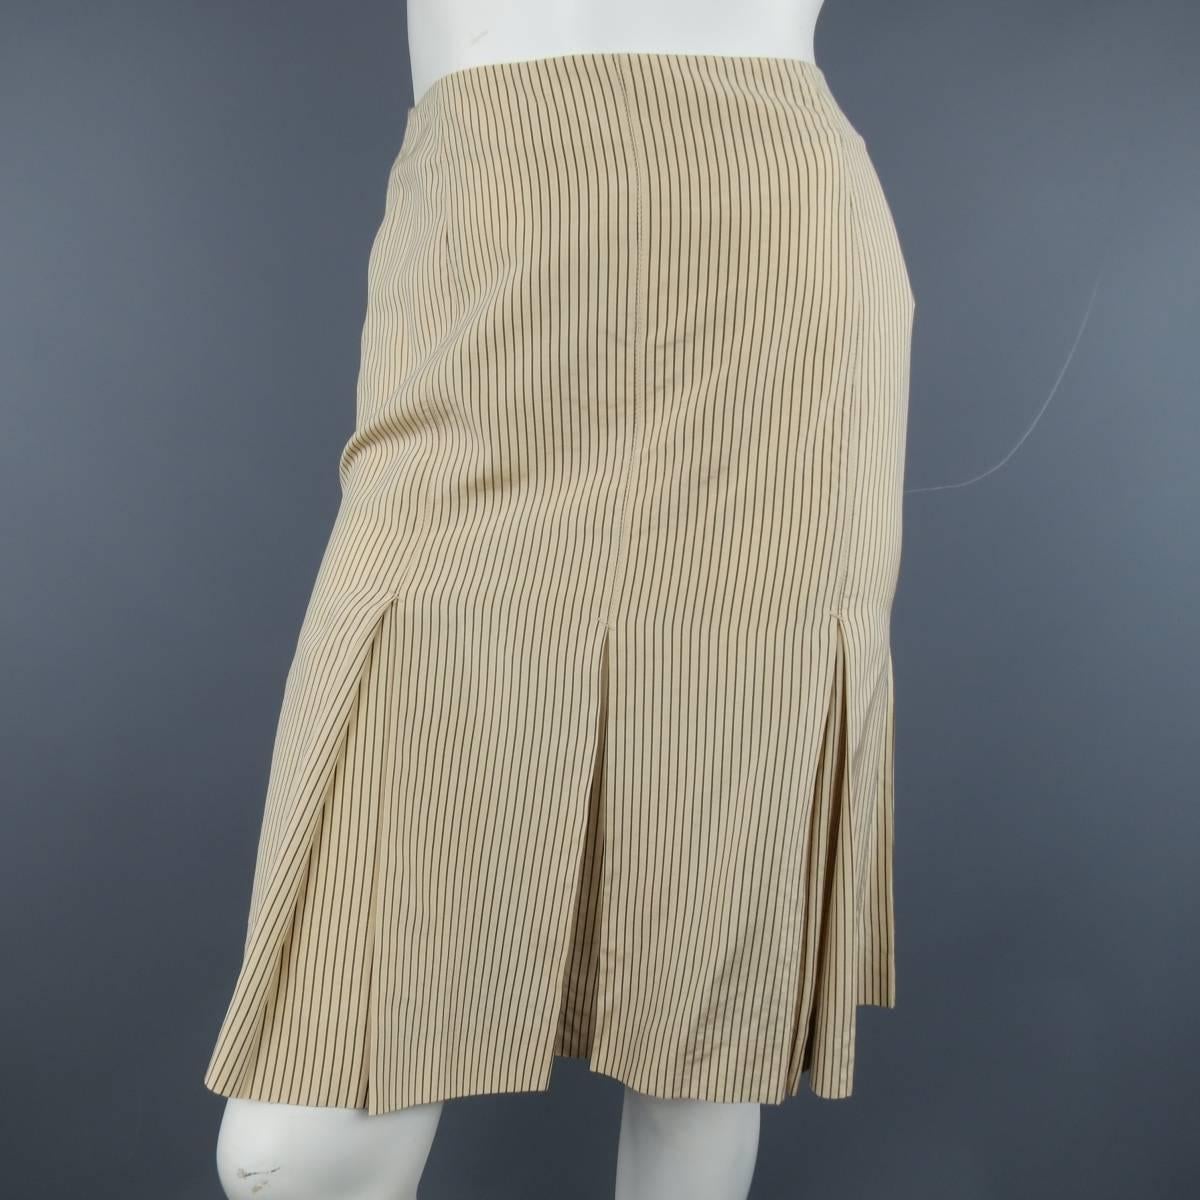 JEAN PAUL GAULTIER skirt in a peachy beige silk  rayon blend with brown pinstripe print in a pencil silhouette with box pleated hem and signature back tab. Made in Italy.
 
Excellent Pre-Owned Condition.
Marked: 6 USA
 
Measurements:
 
Waste: 28